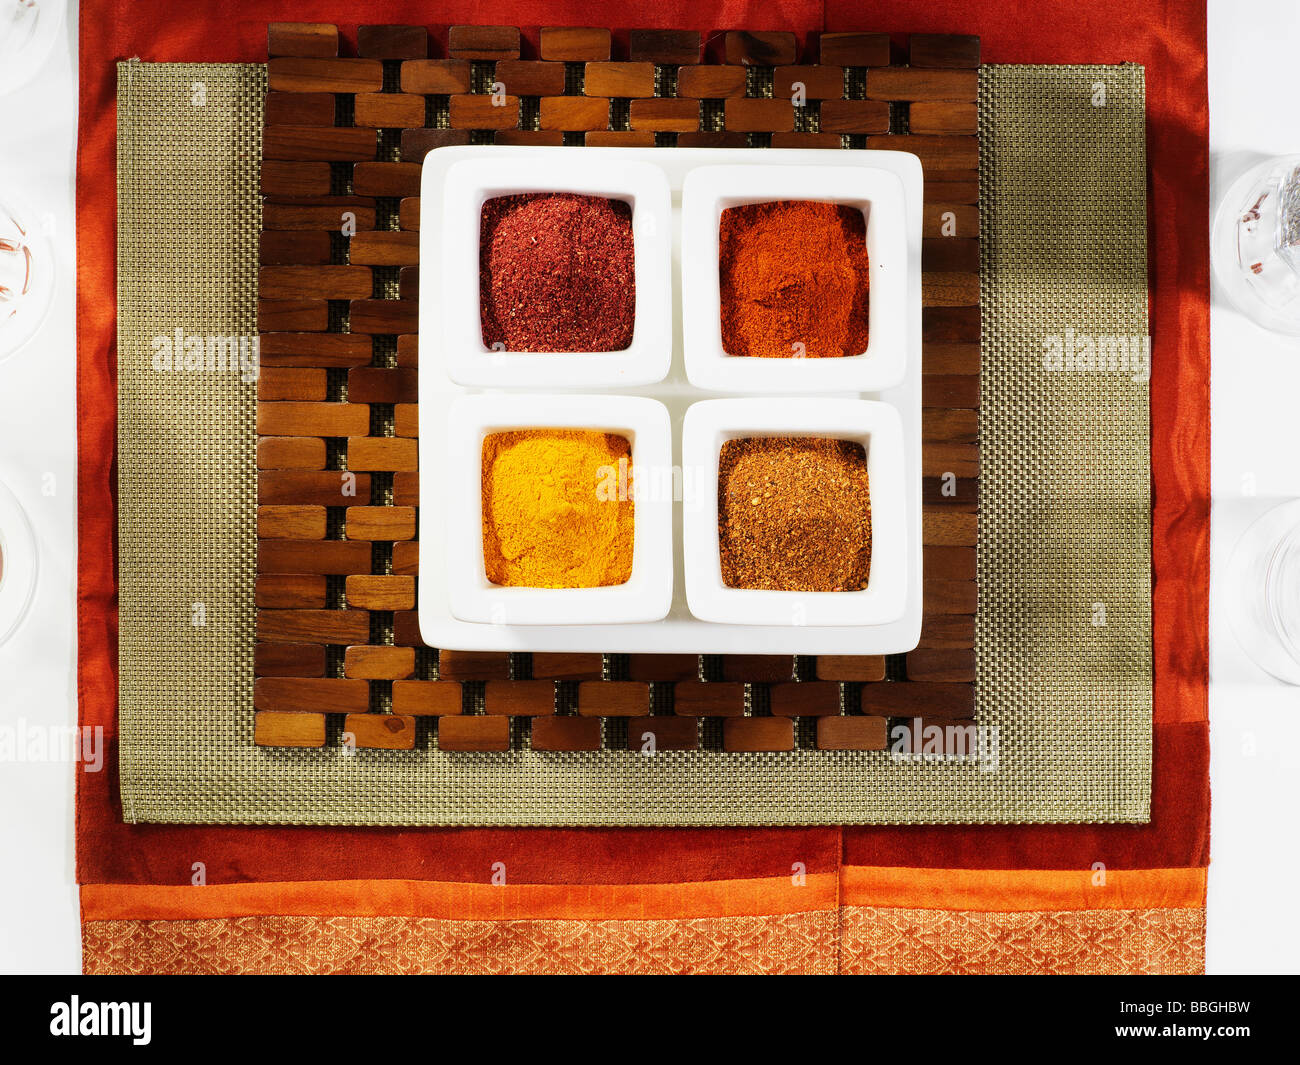 A selection of different spices in a white spice box on a wooden placemat and red background Stock Photo